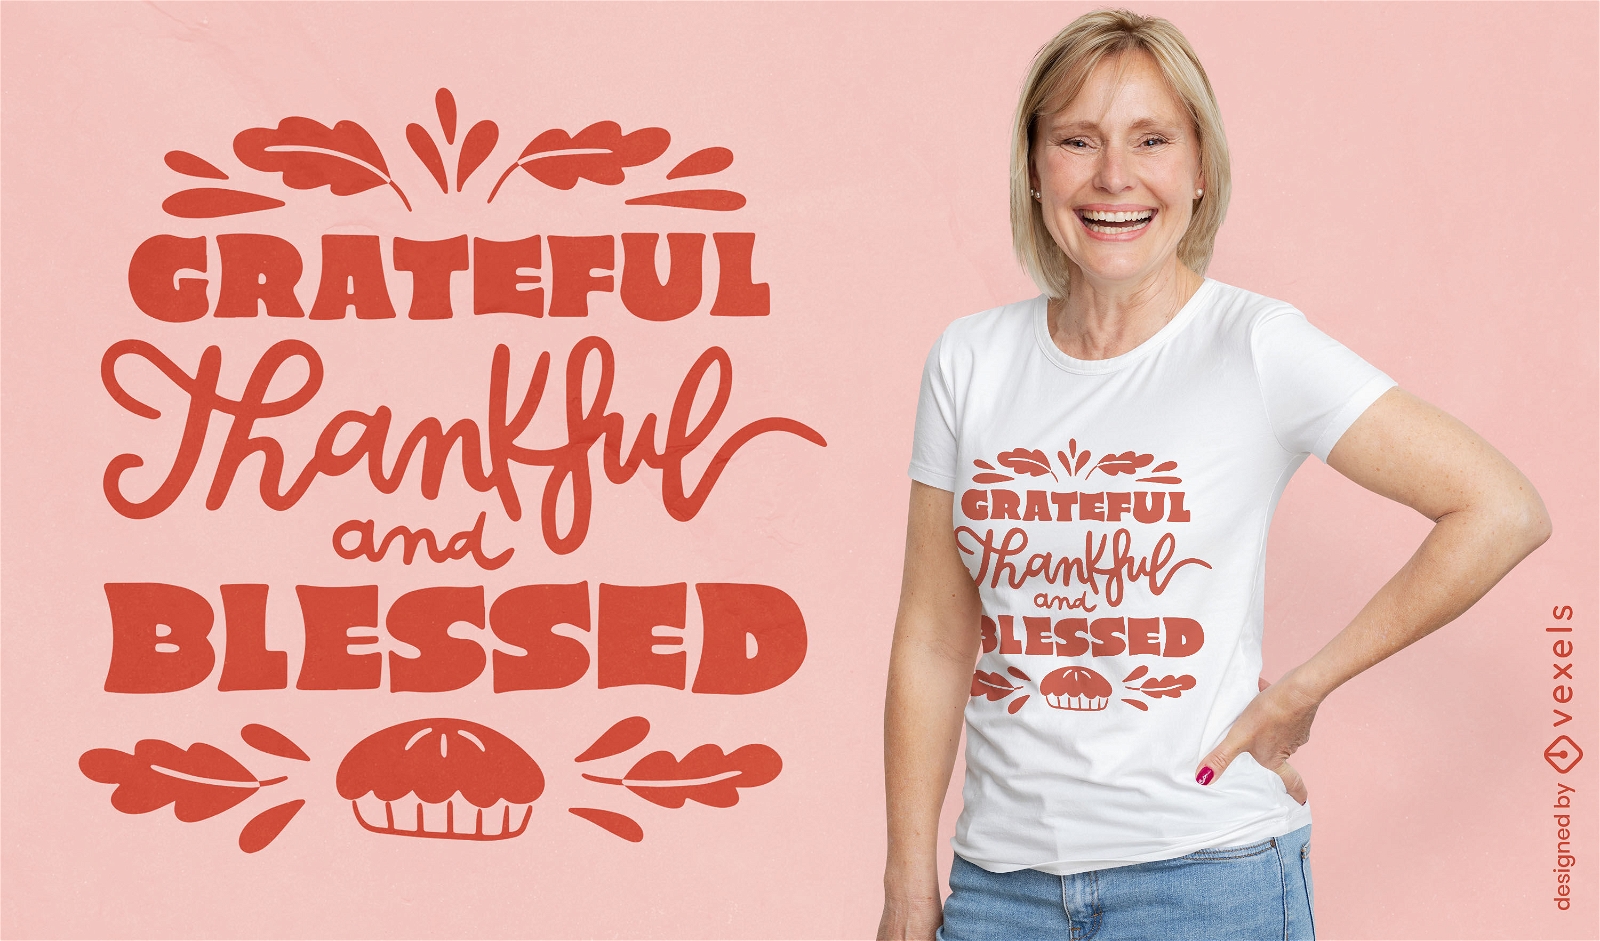 Thankful and blessed quote t-shirt design